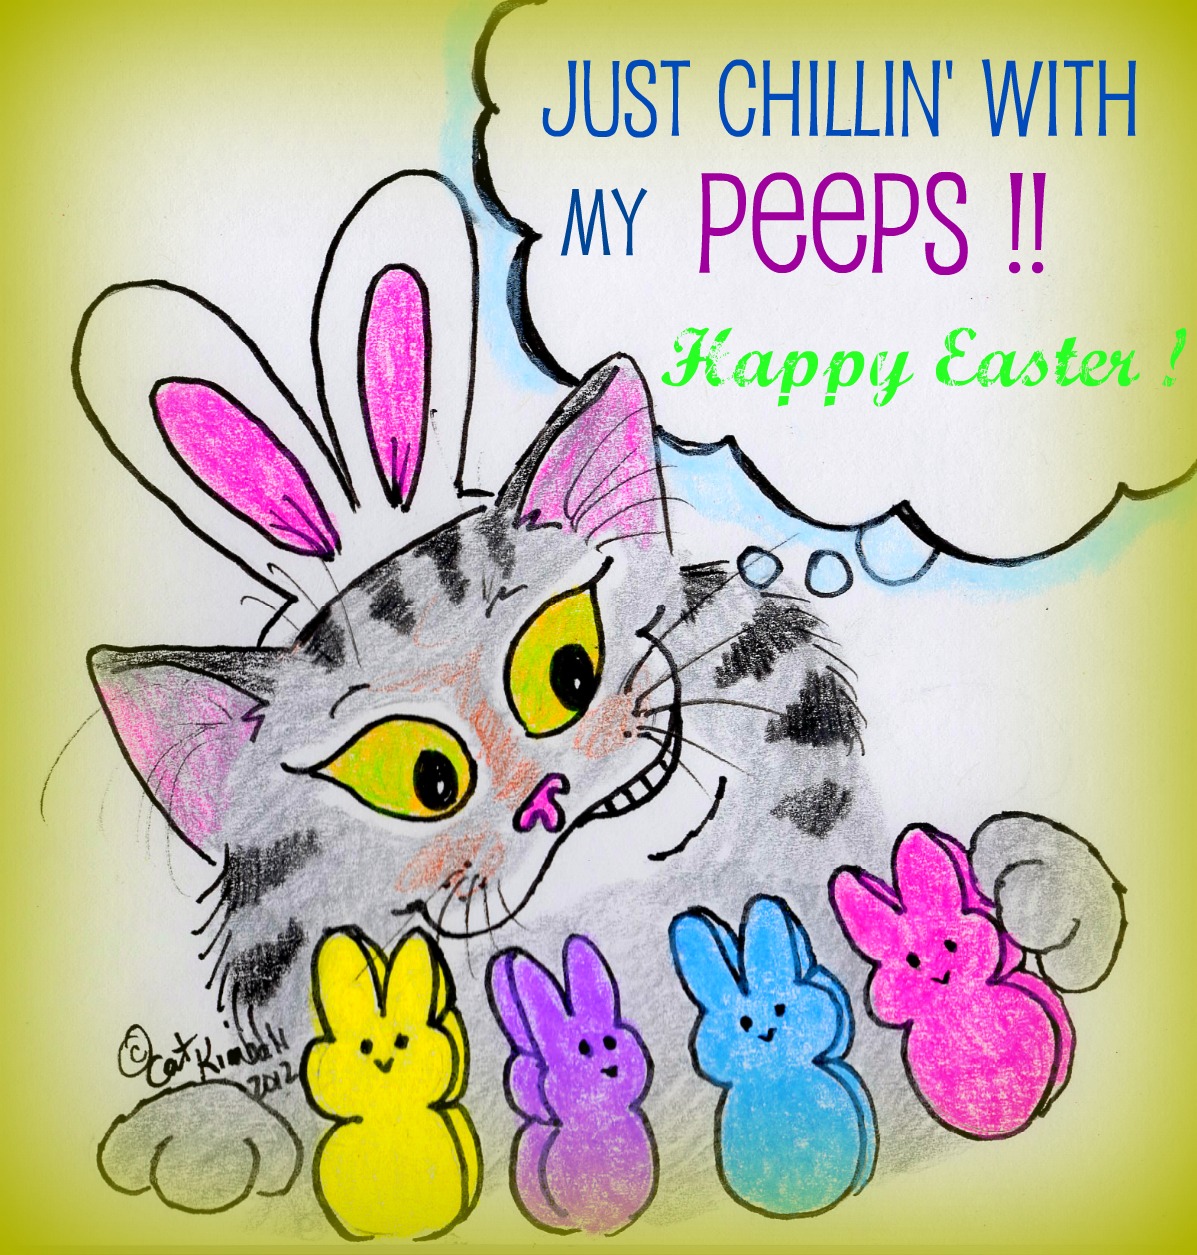 Sunday Funny: Happy Easter! | Life With Cats